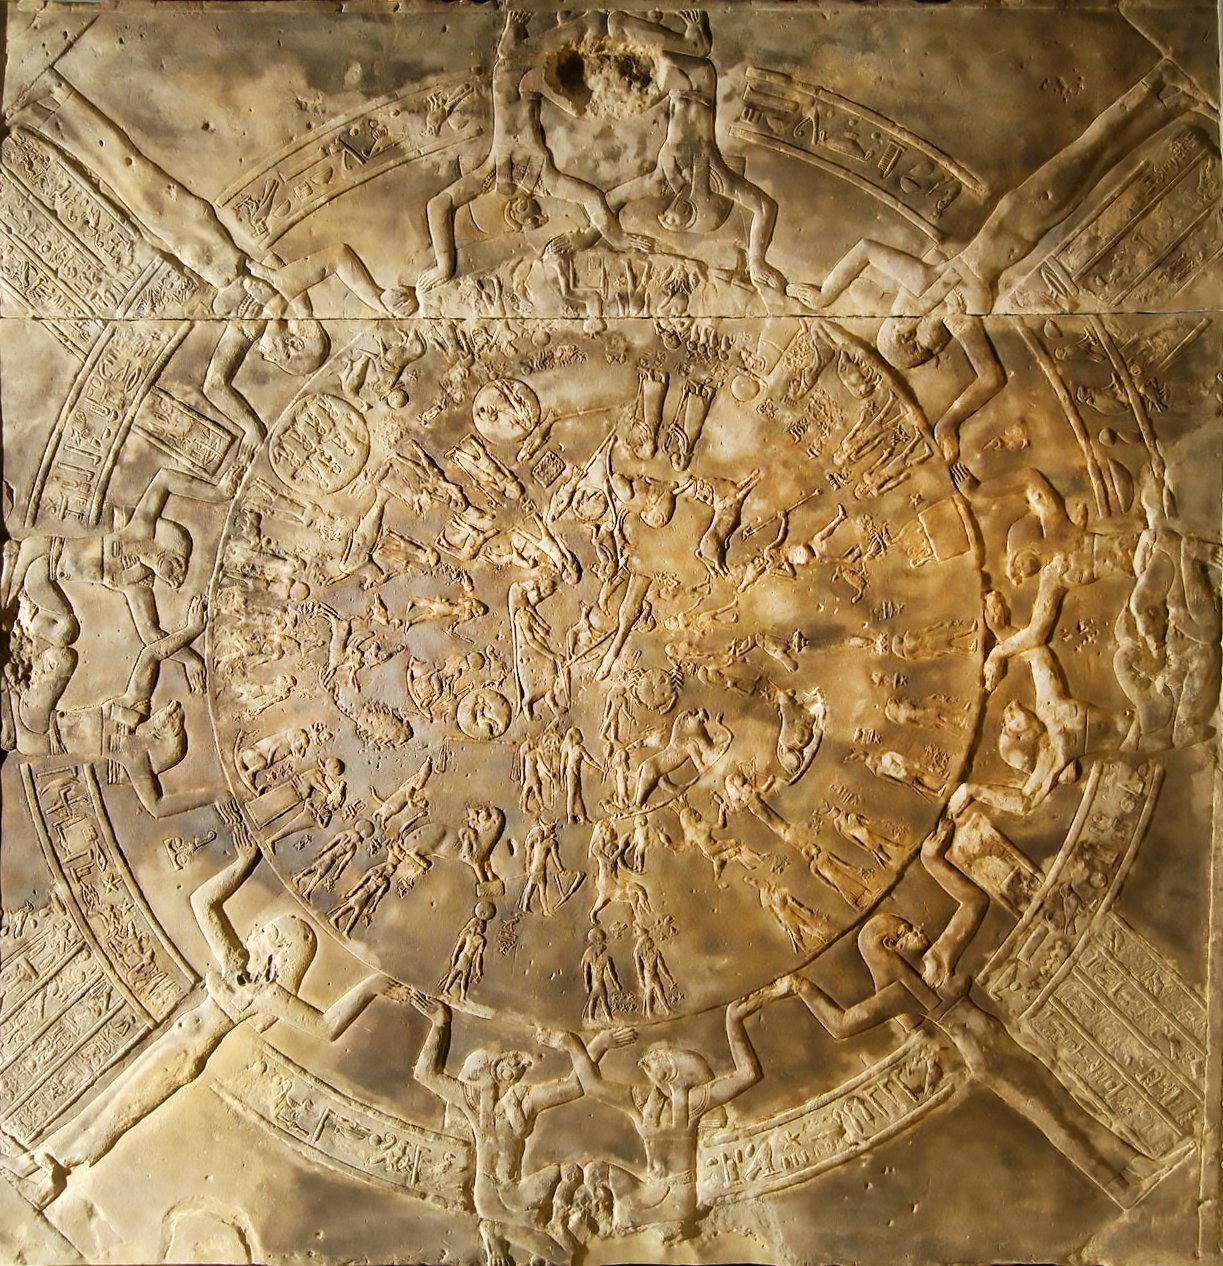 Dendera Zodiac from circa 50 BCE, originally located in the Dendera Temple Complex dedicated to the god Osiris on the Nile's West Bank. This sandstone bas-relief showcases the 12 zodiac constellations, five planets, and both a solar and lunar eclipse.